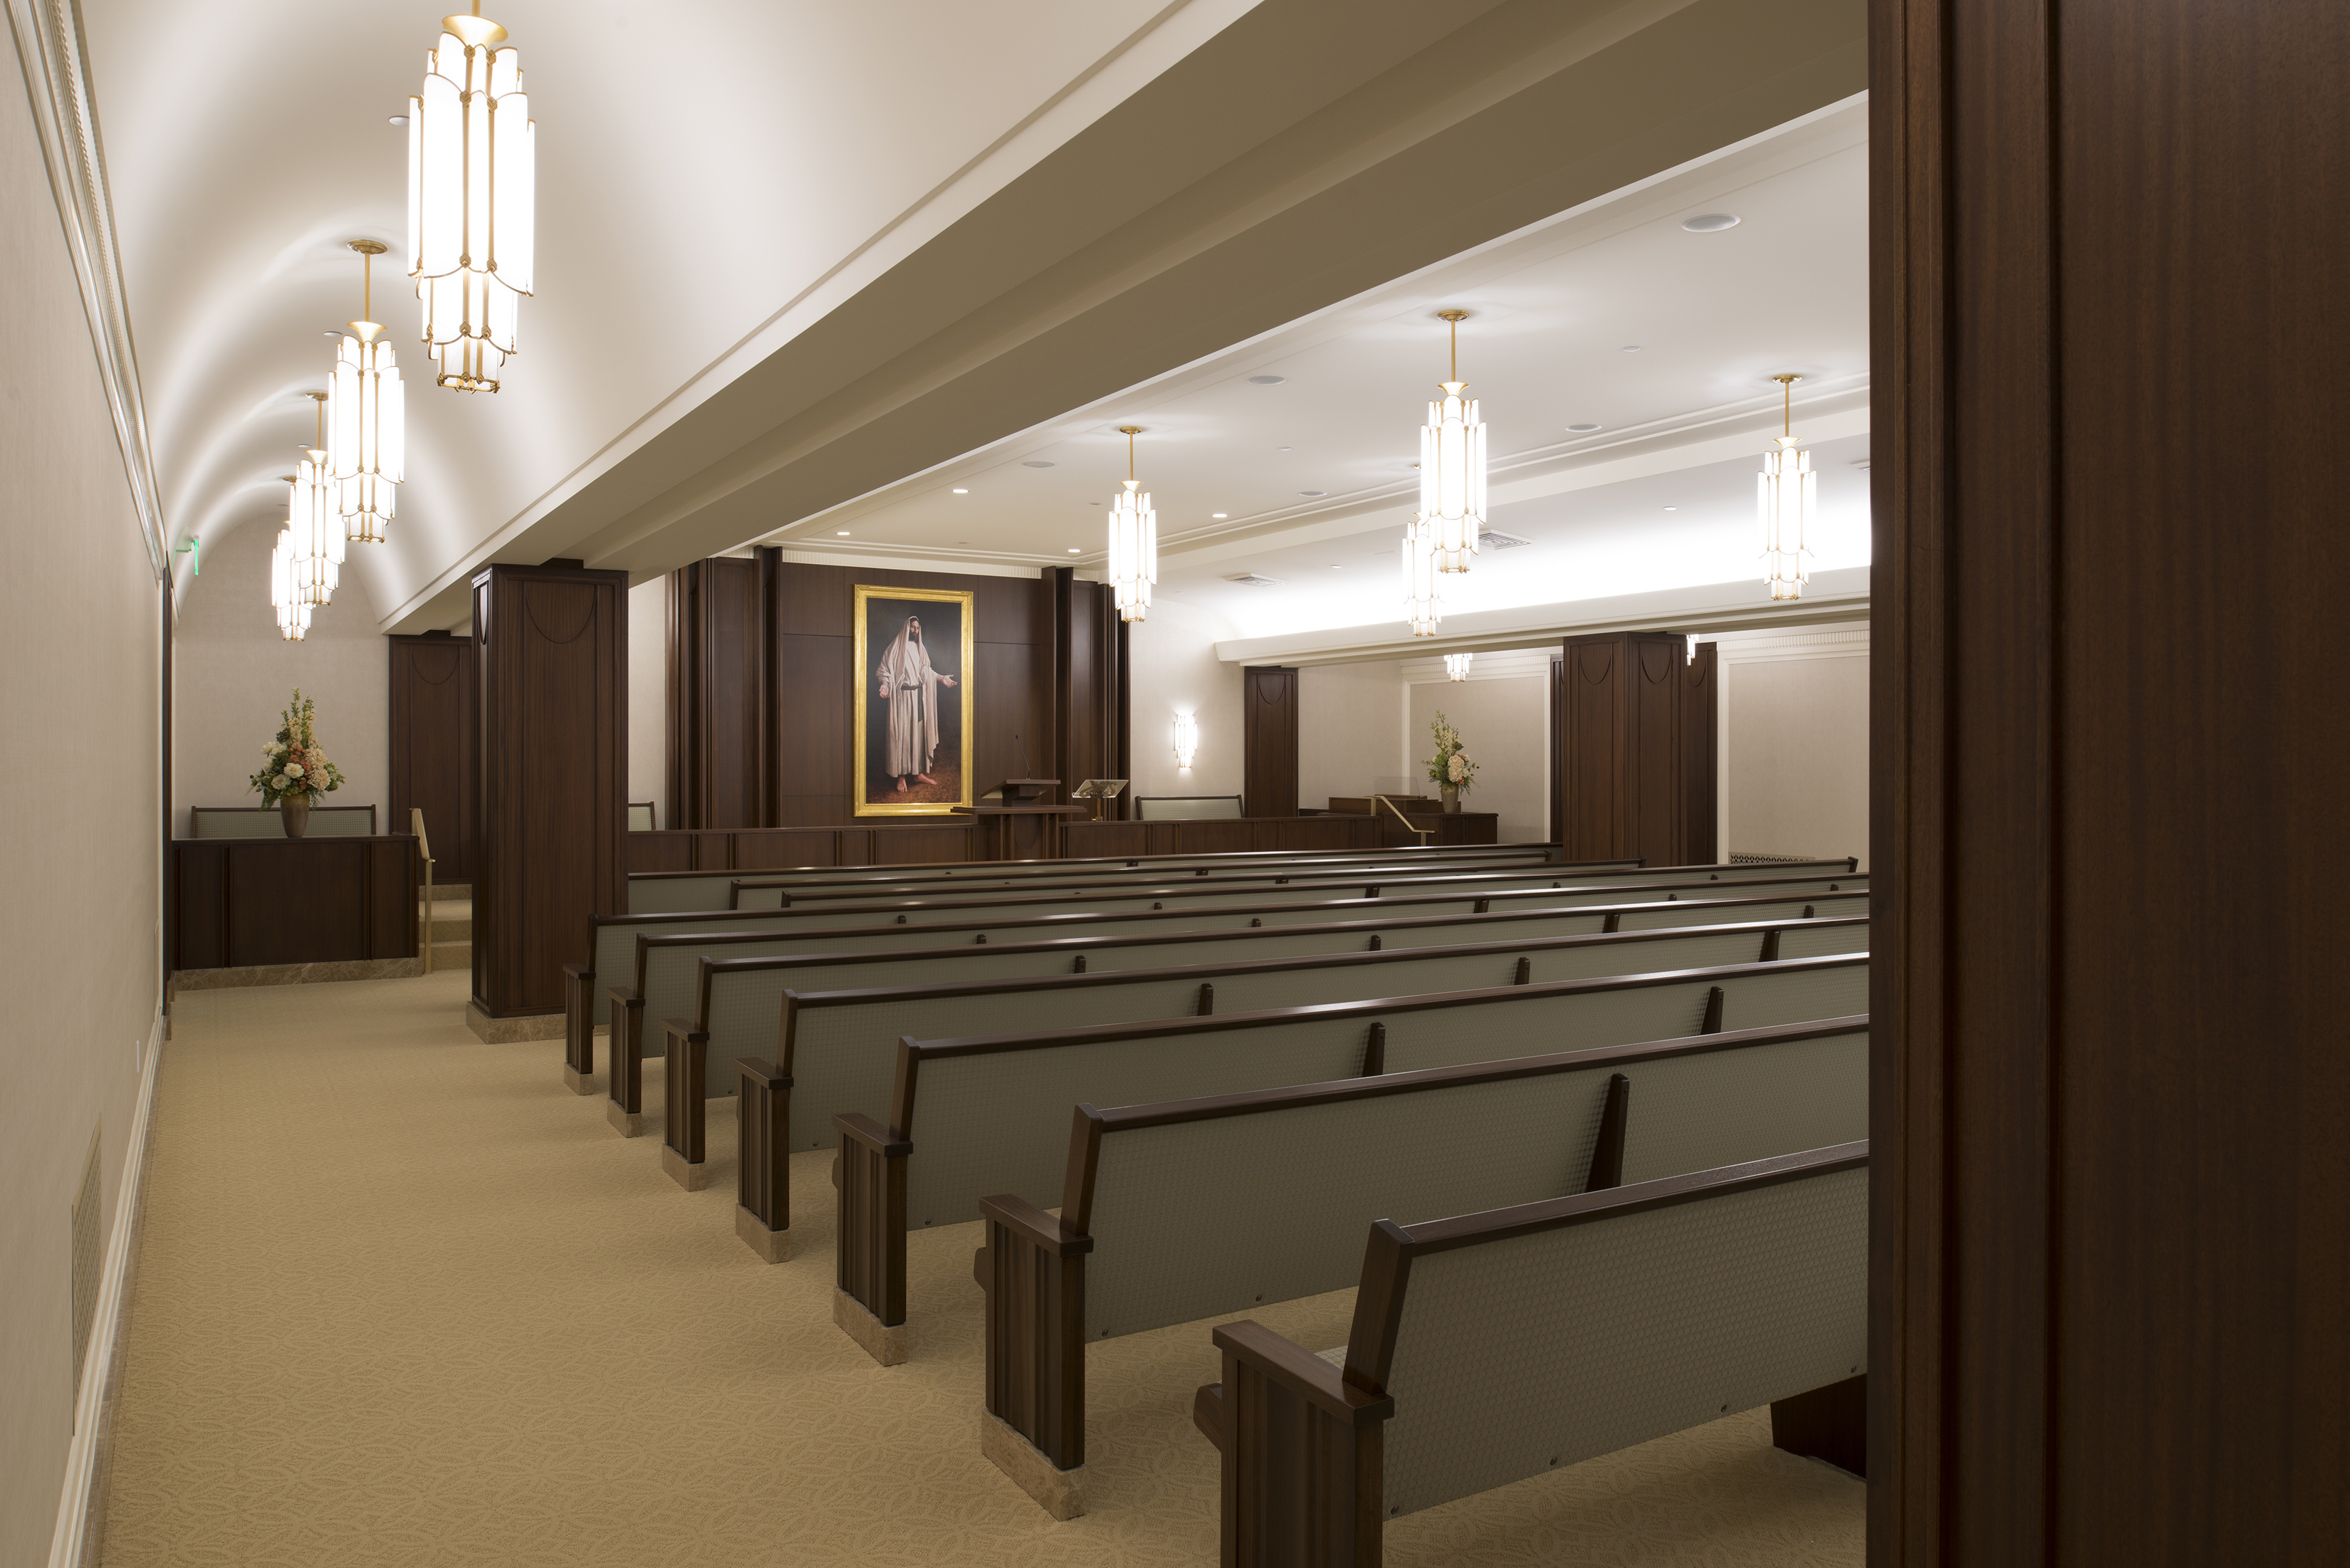 A chapel with many pews to sit, with a pulpit and painting of Christ at the front of the room.